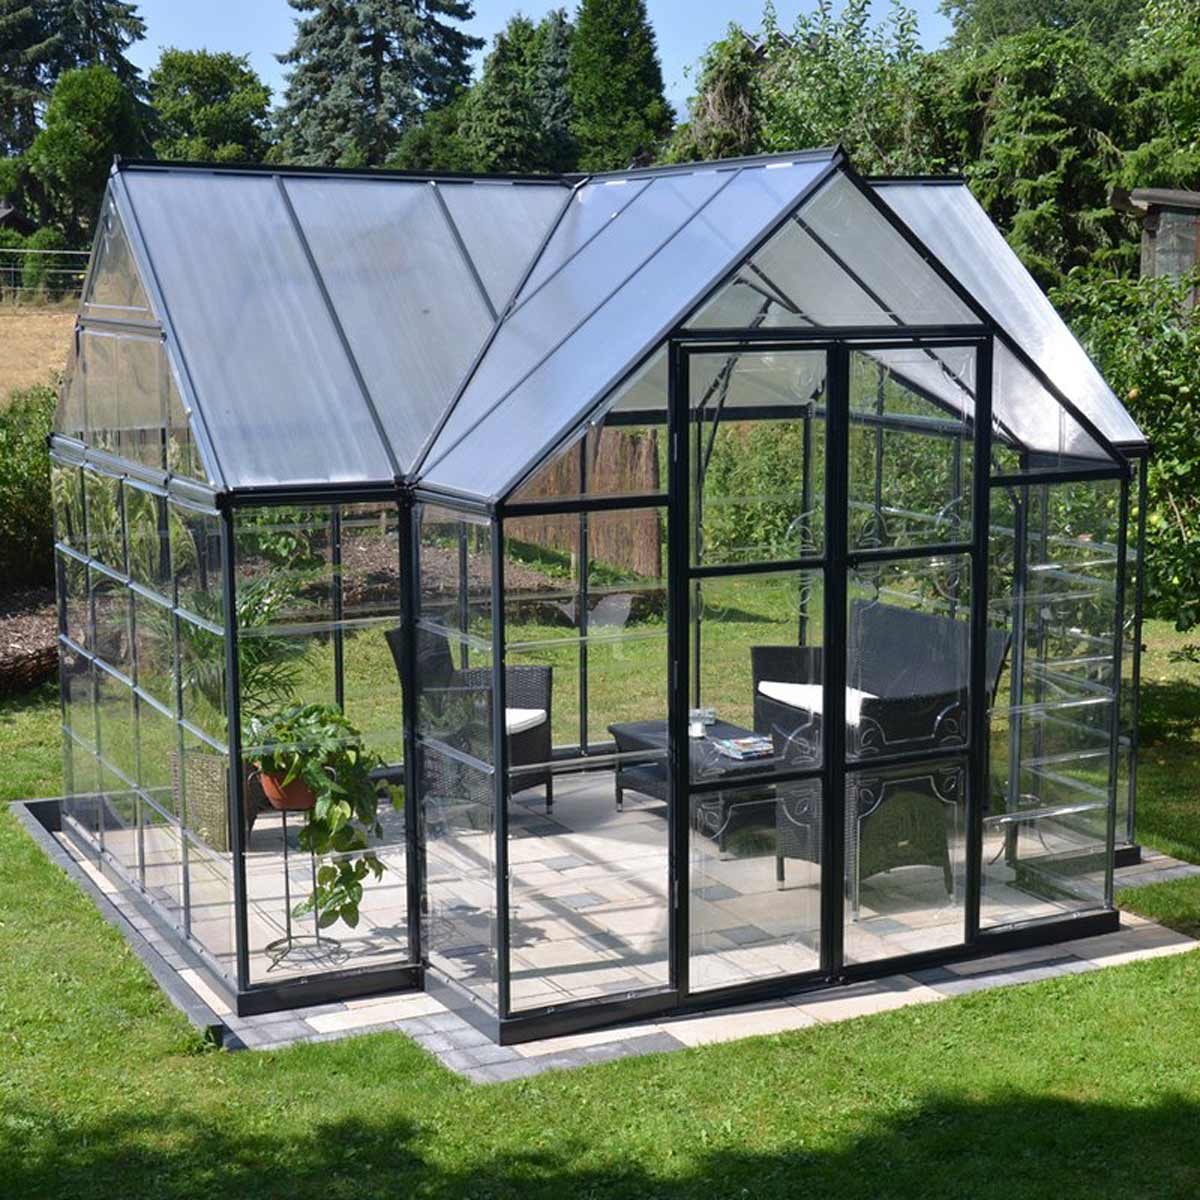 7 Greenhouses For Your Backyard